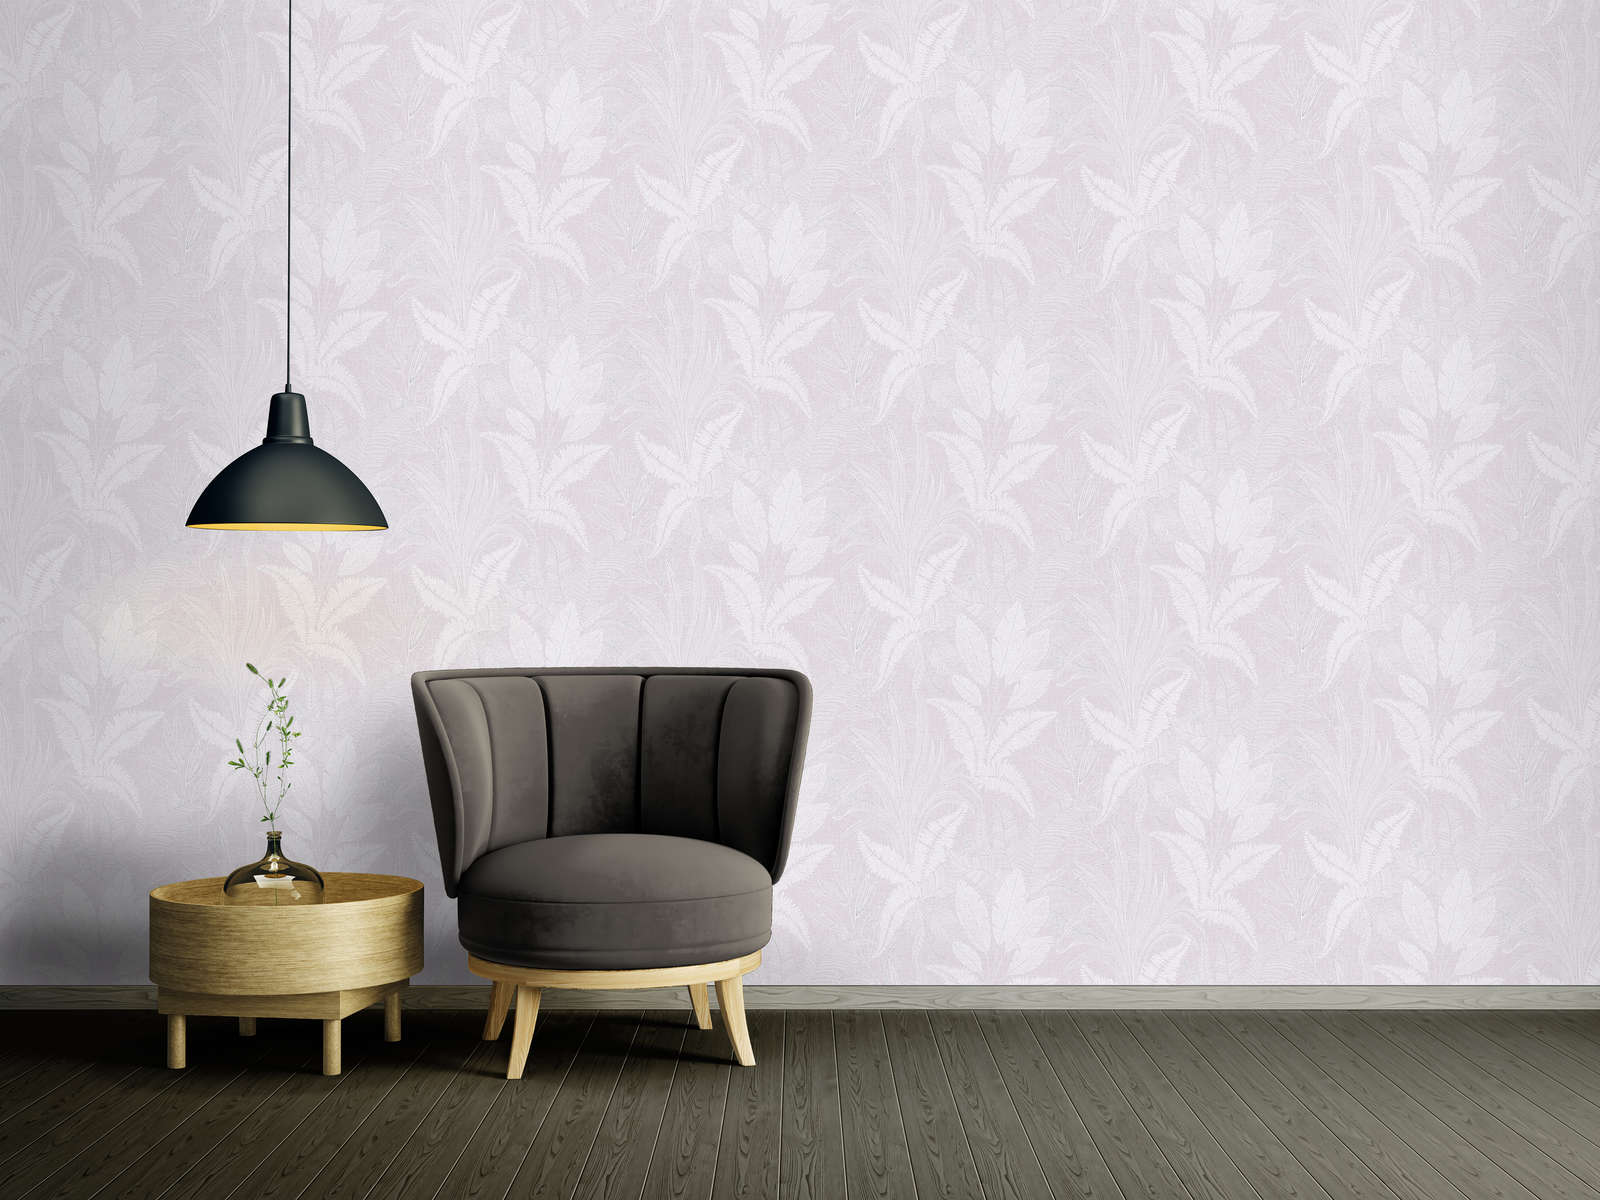             Non-woven wallpaper with large leaf pattern lightly textured - violet, white, grey
        